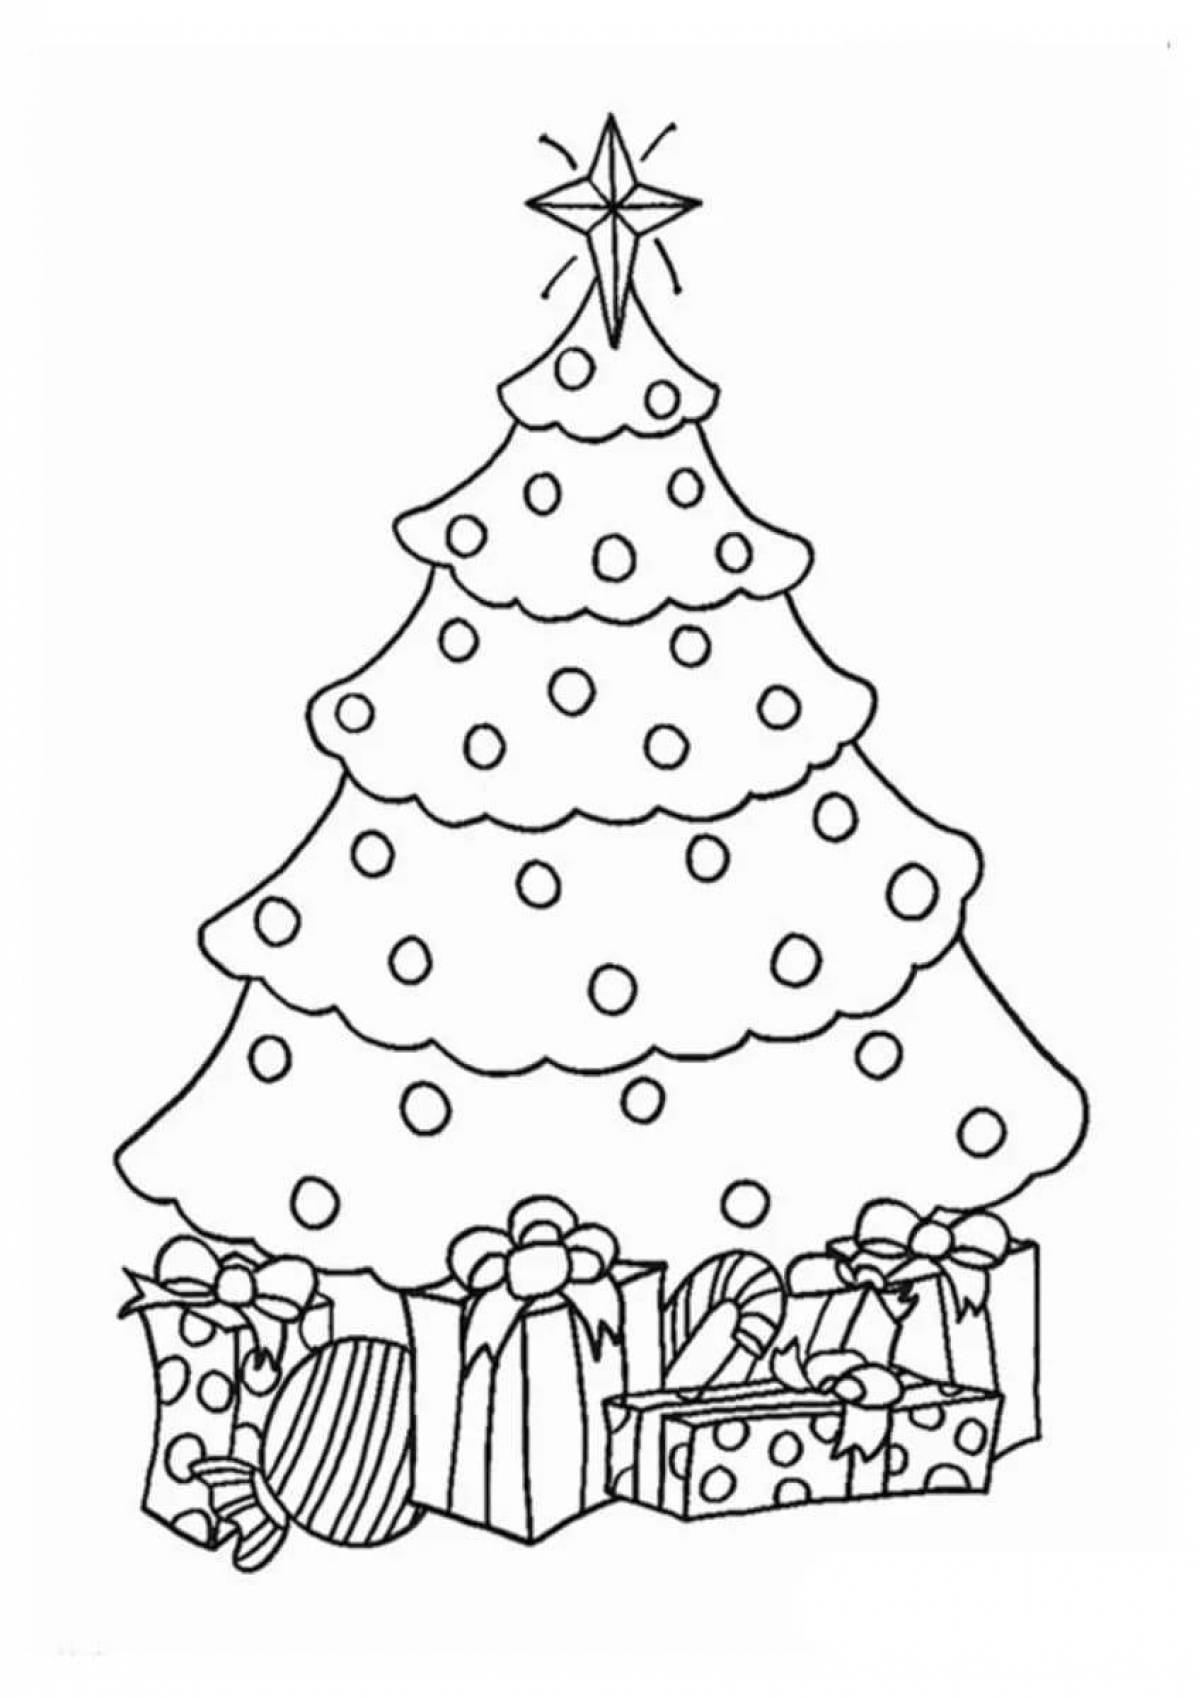 Magic Christmas tree coloring book for 5-6 year olds